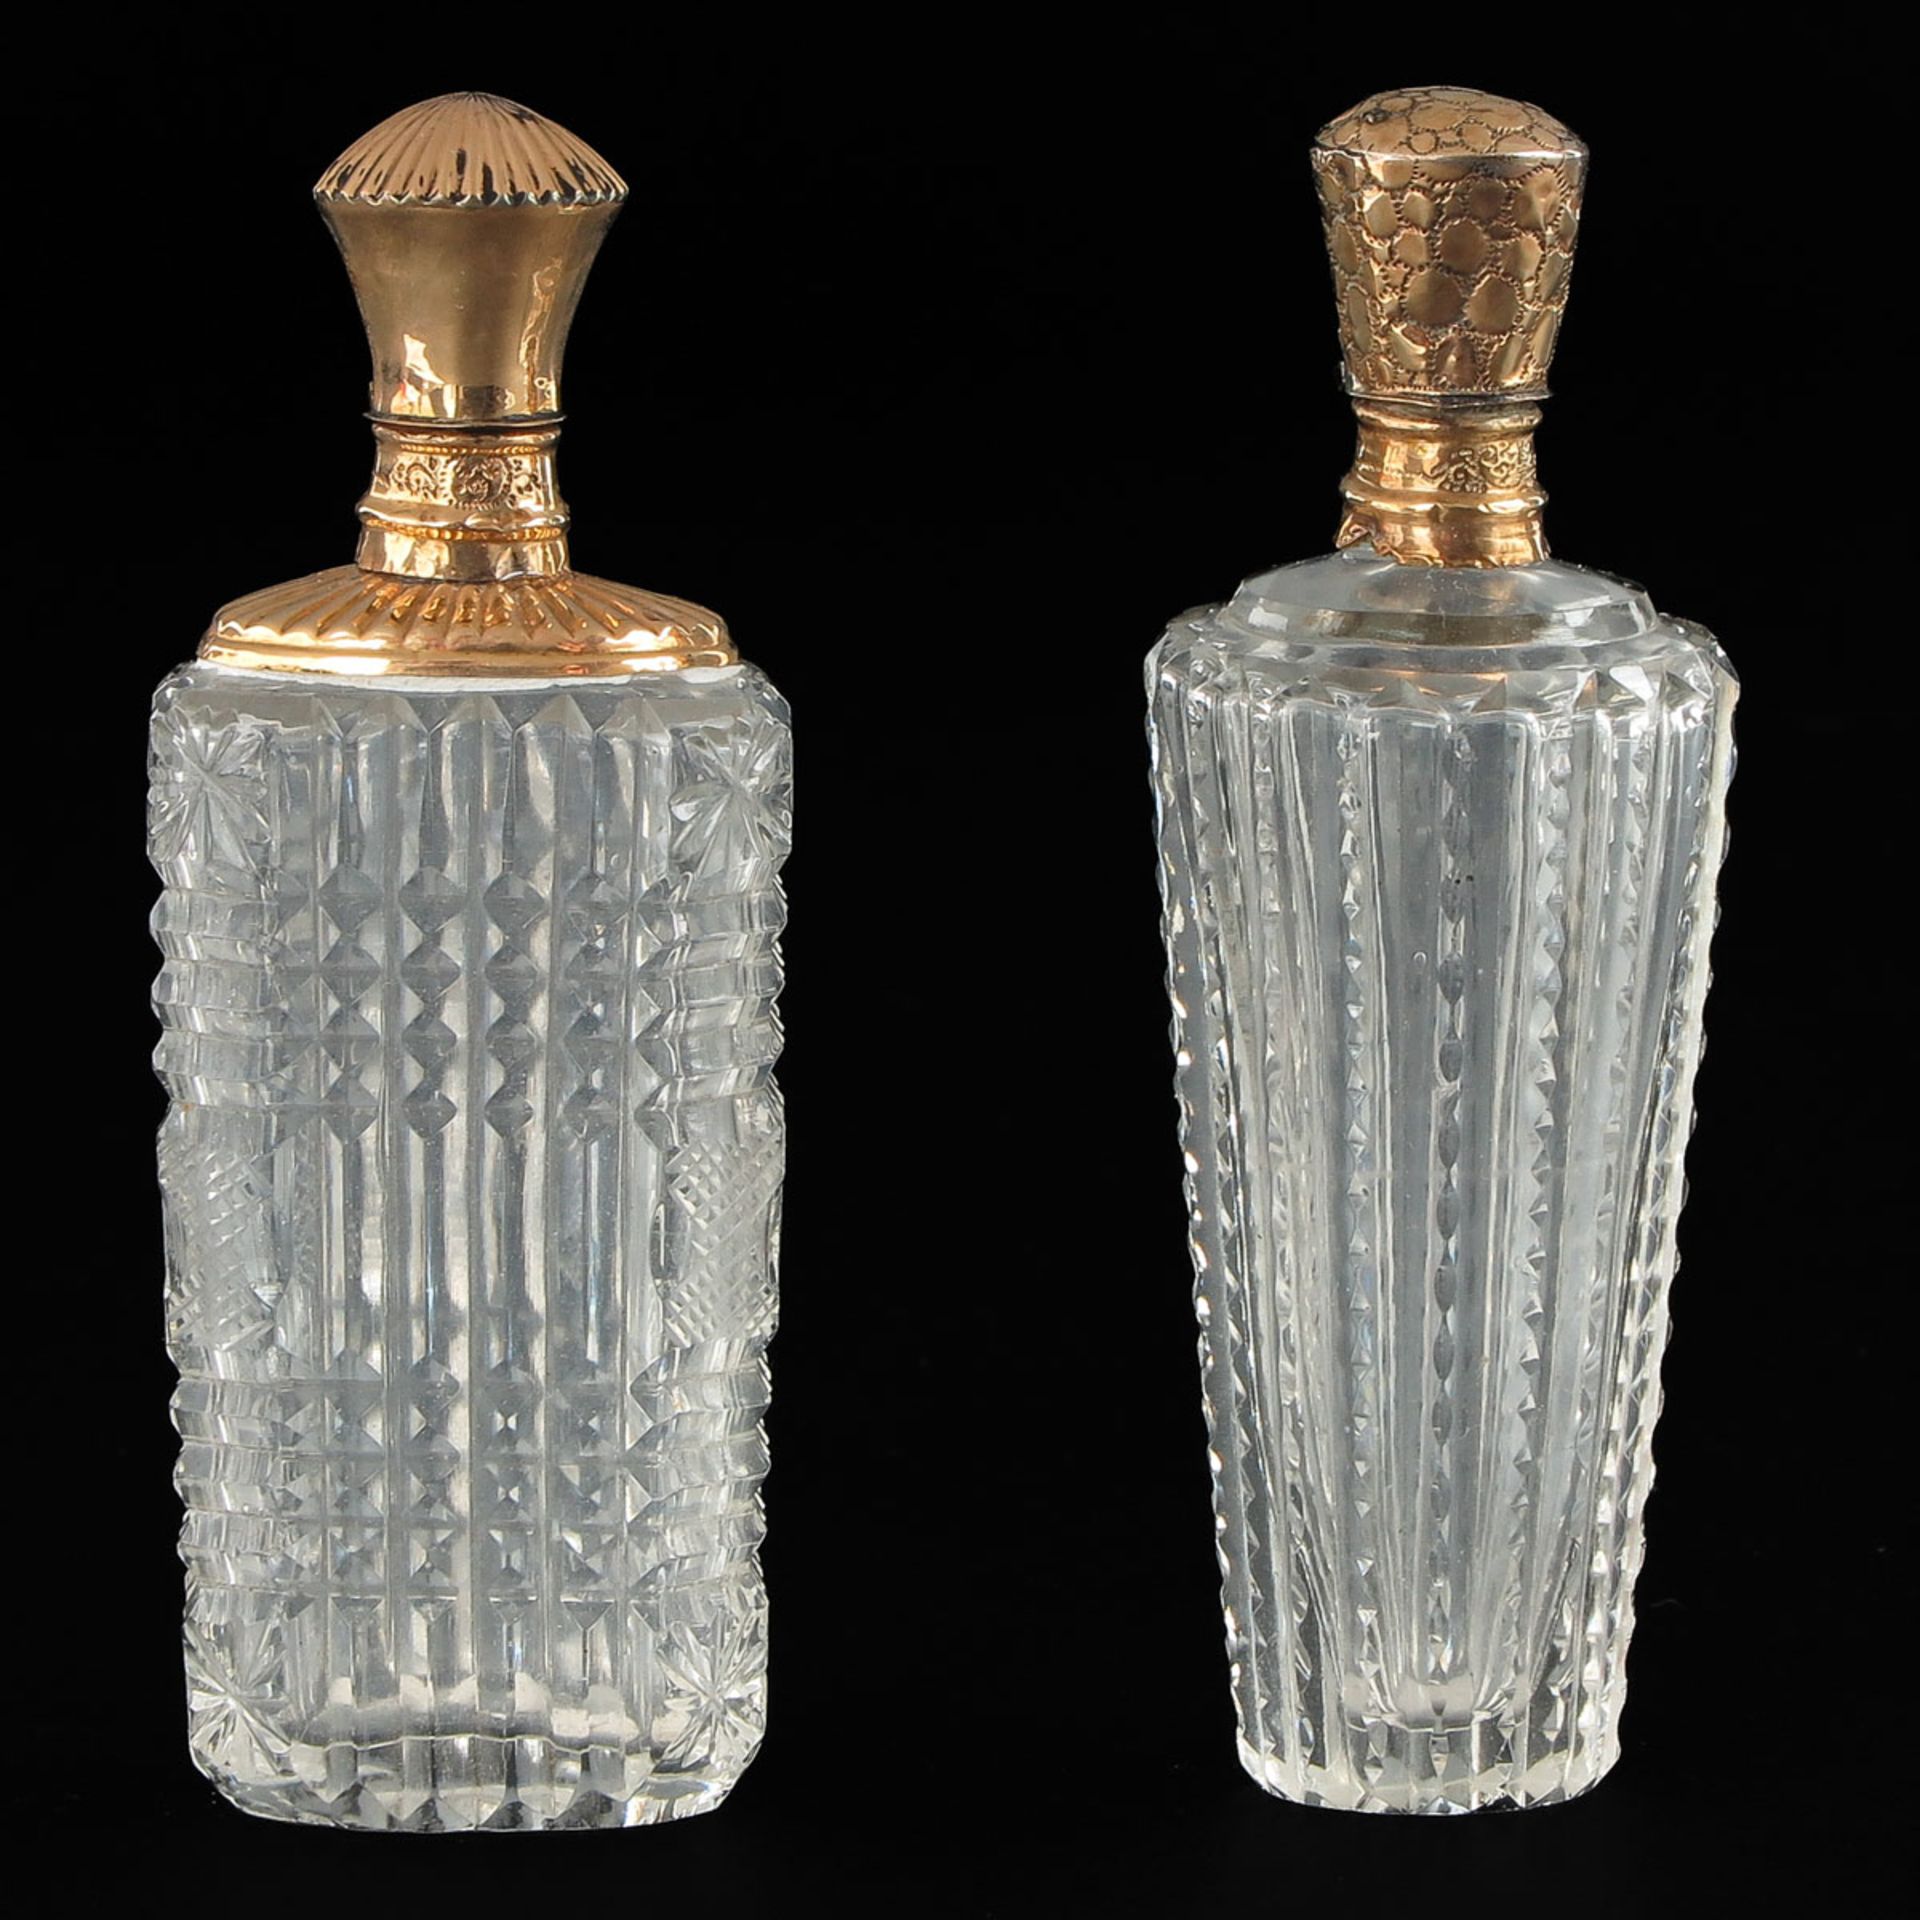 A Lot of 2 Perfume Bottles